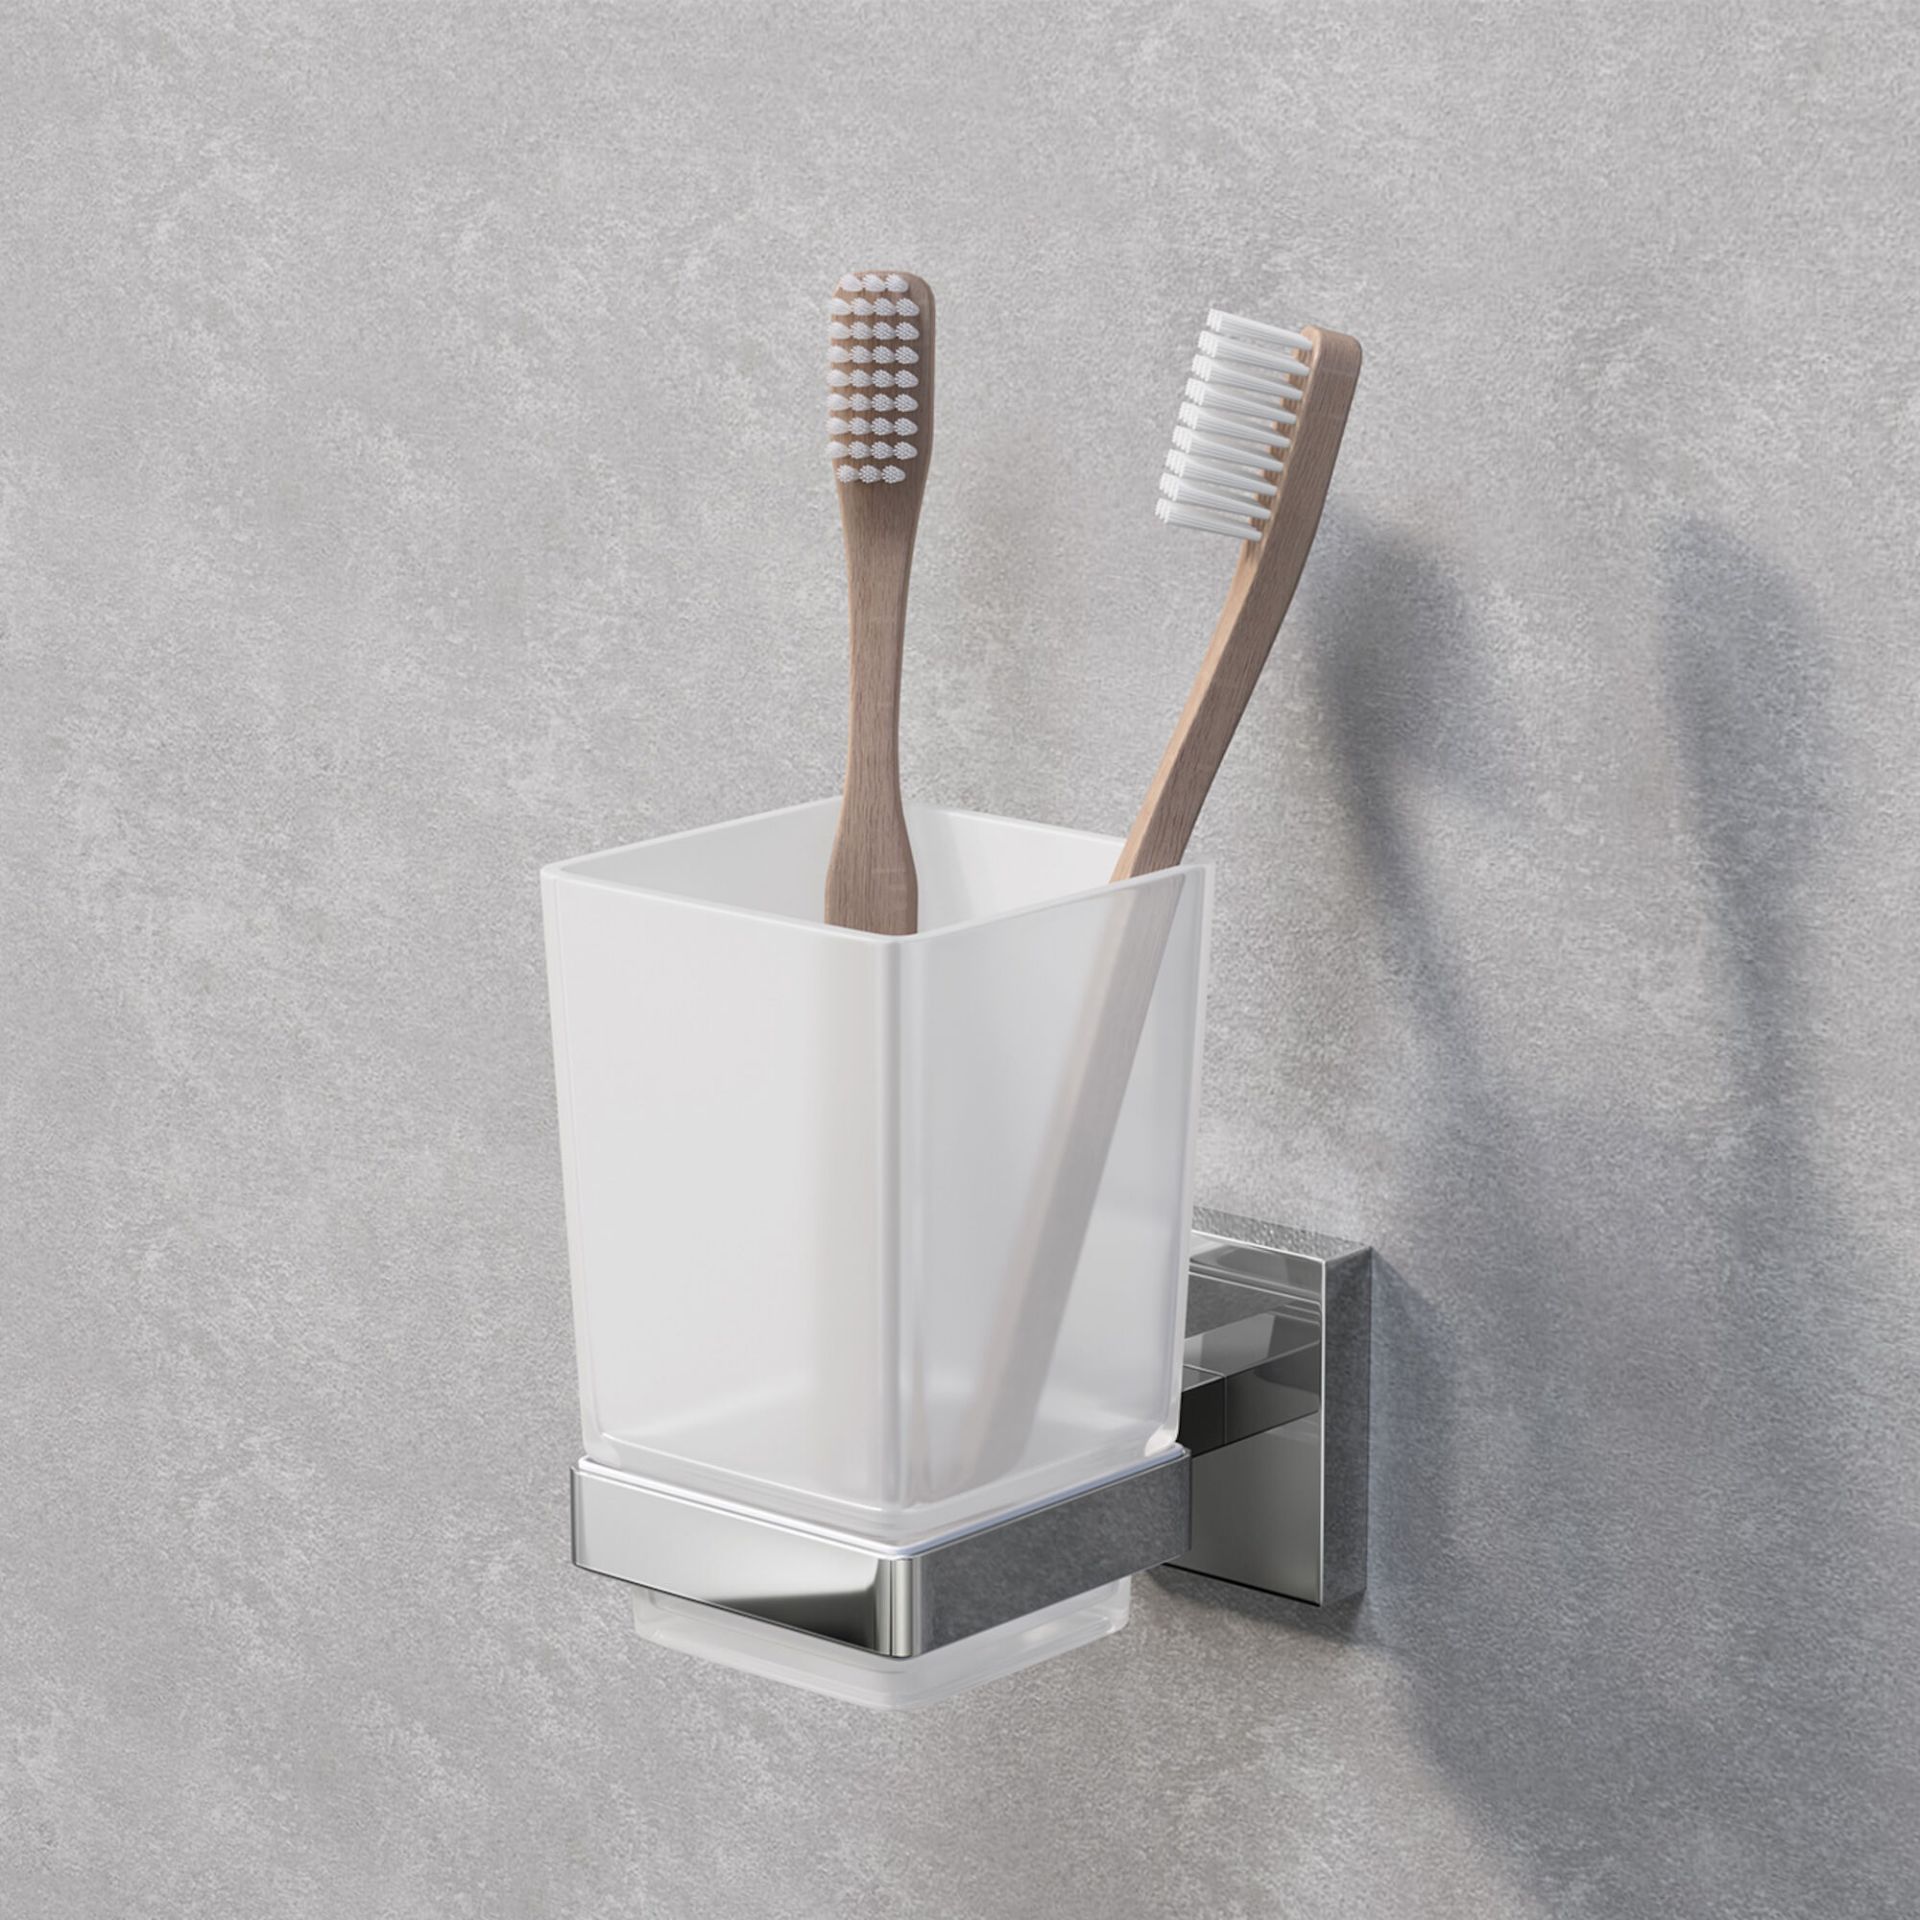 (EE1015) Jesmond Tumbler Holder Finishes your bathroom with a little extra functionality and s...